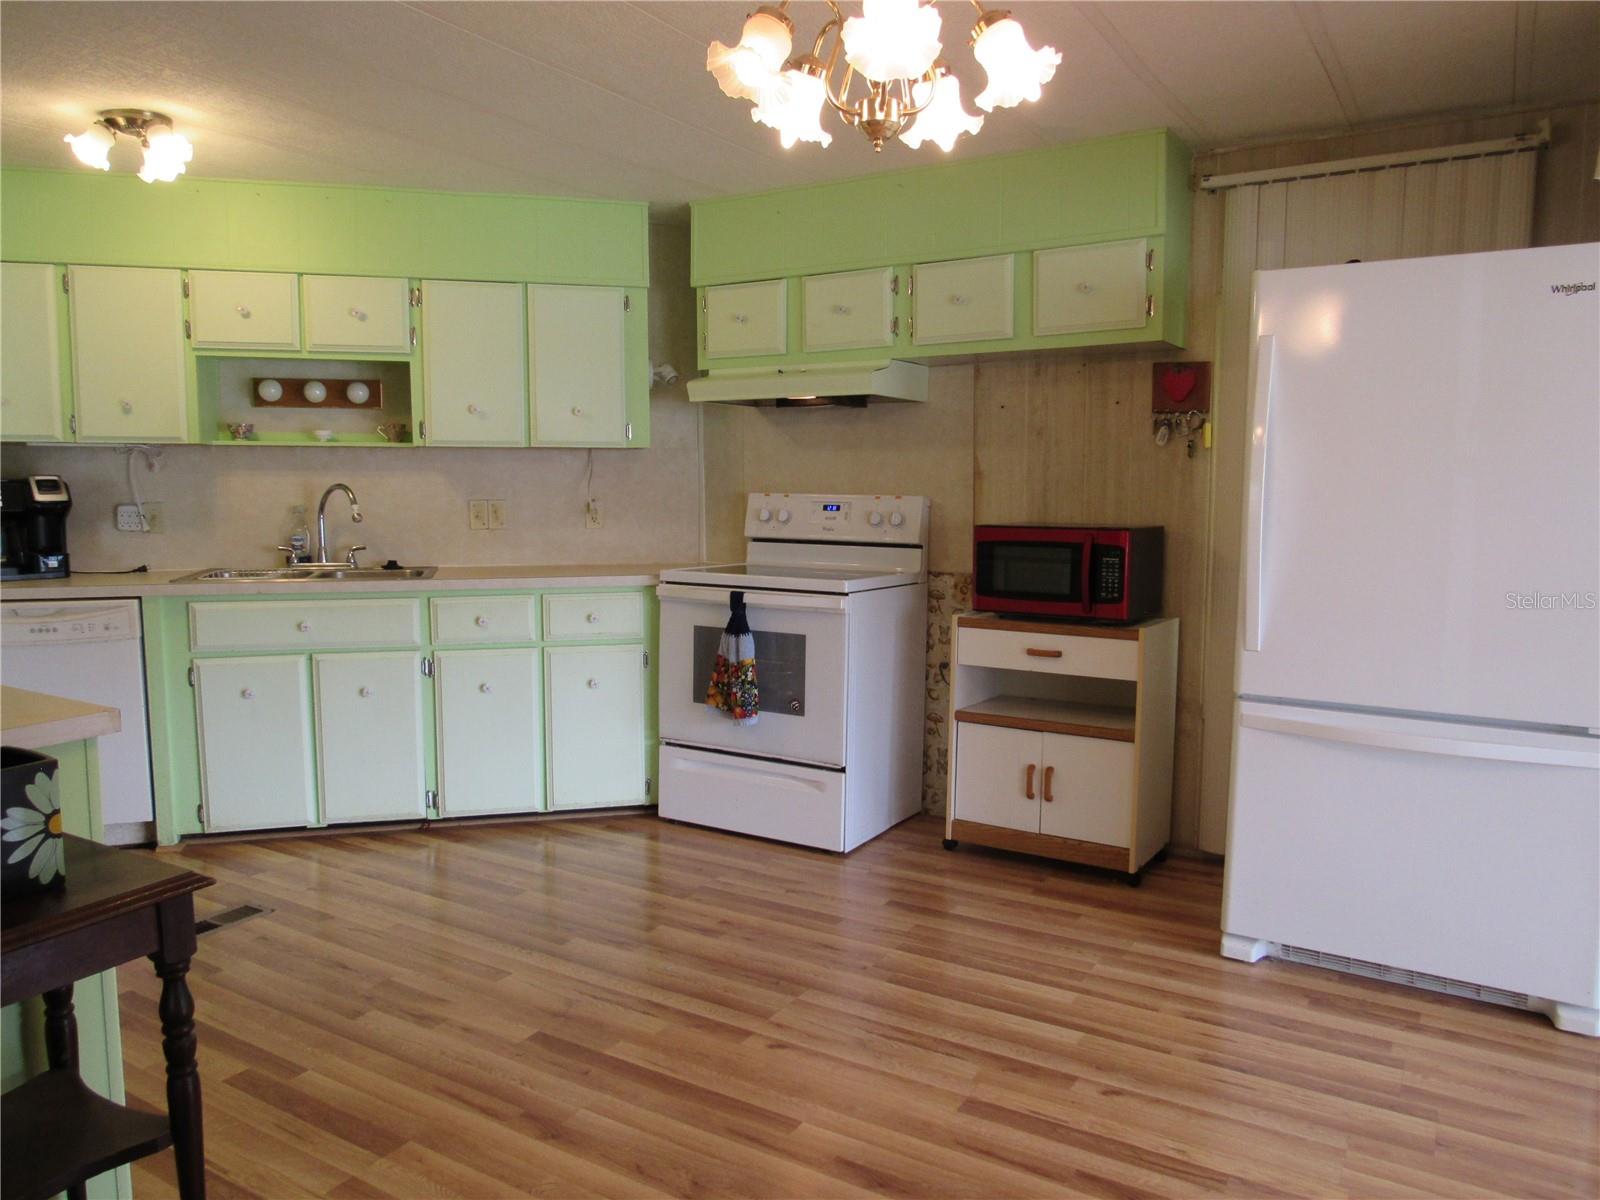 Spacious eat-in kitchen with laminate flooring.